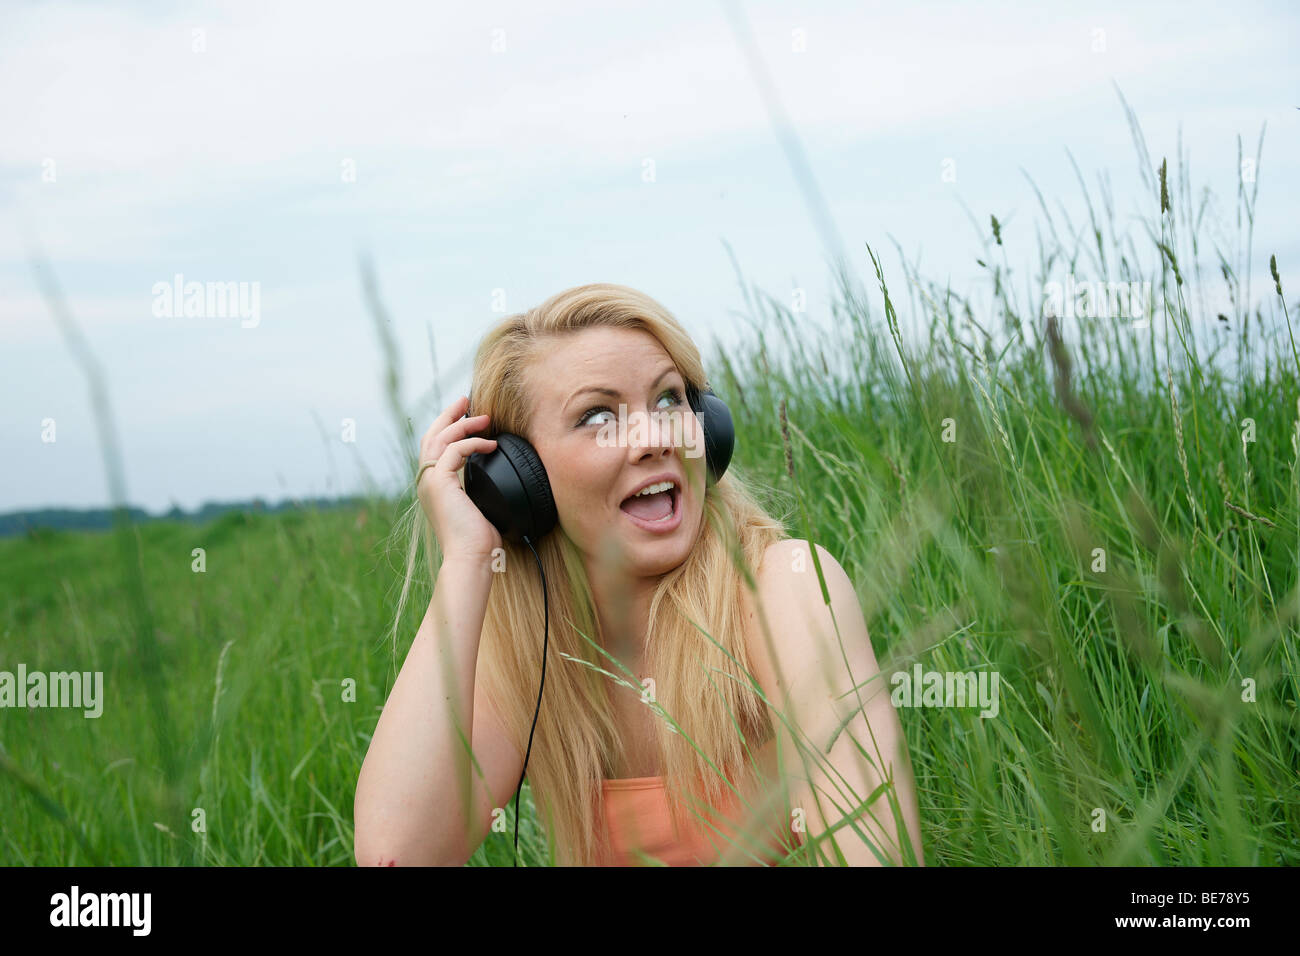 Young blonde woman sitting on a lawn, listening to music with headphones Stock Photo